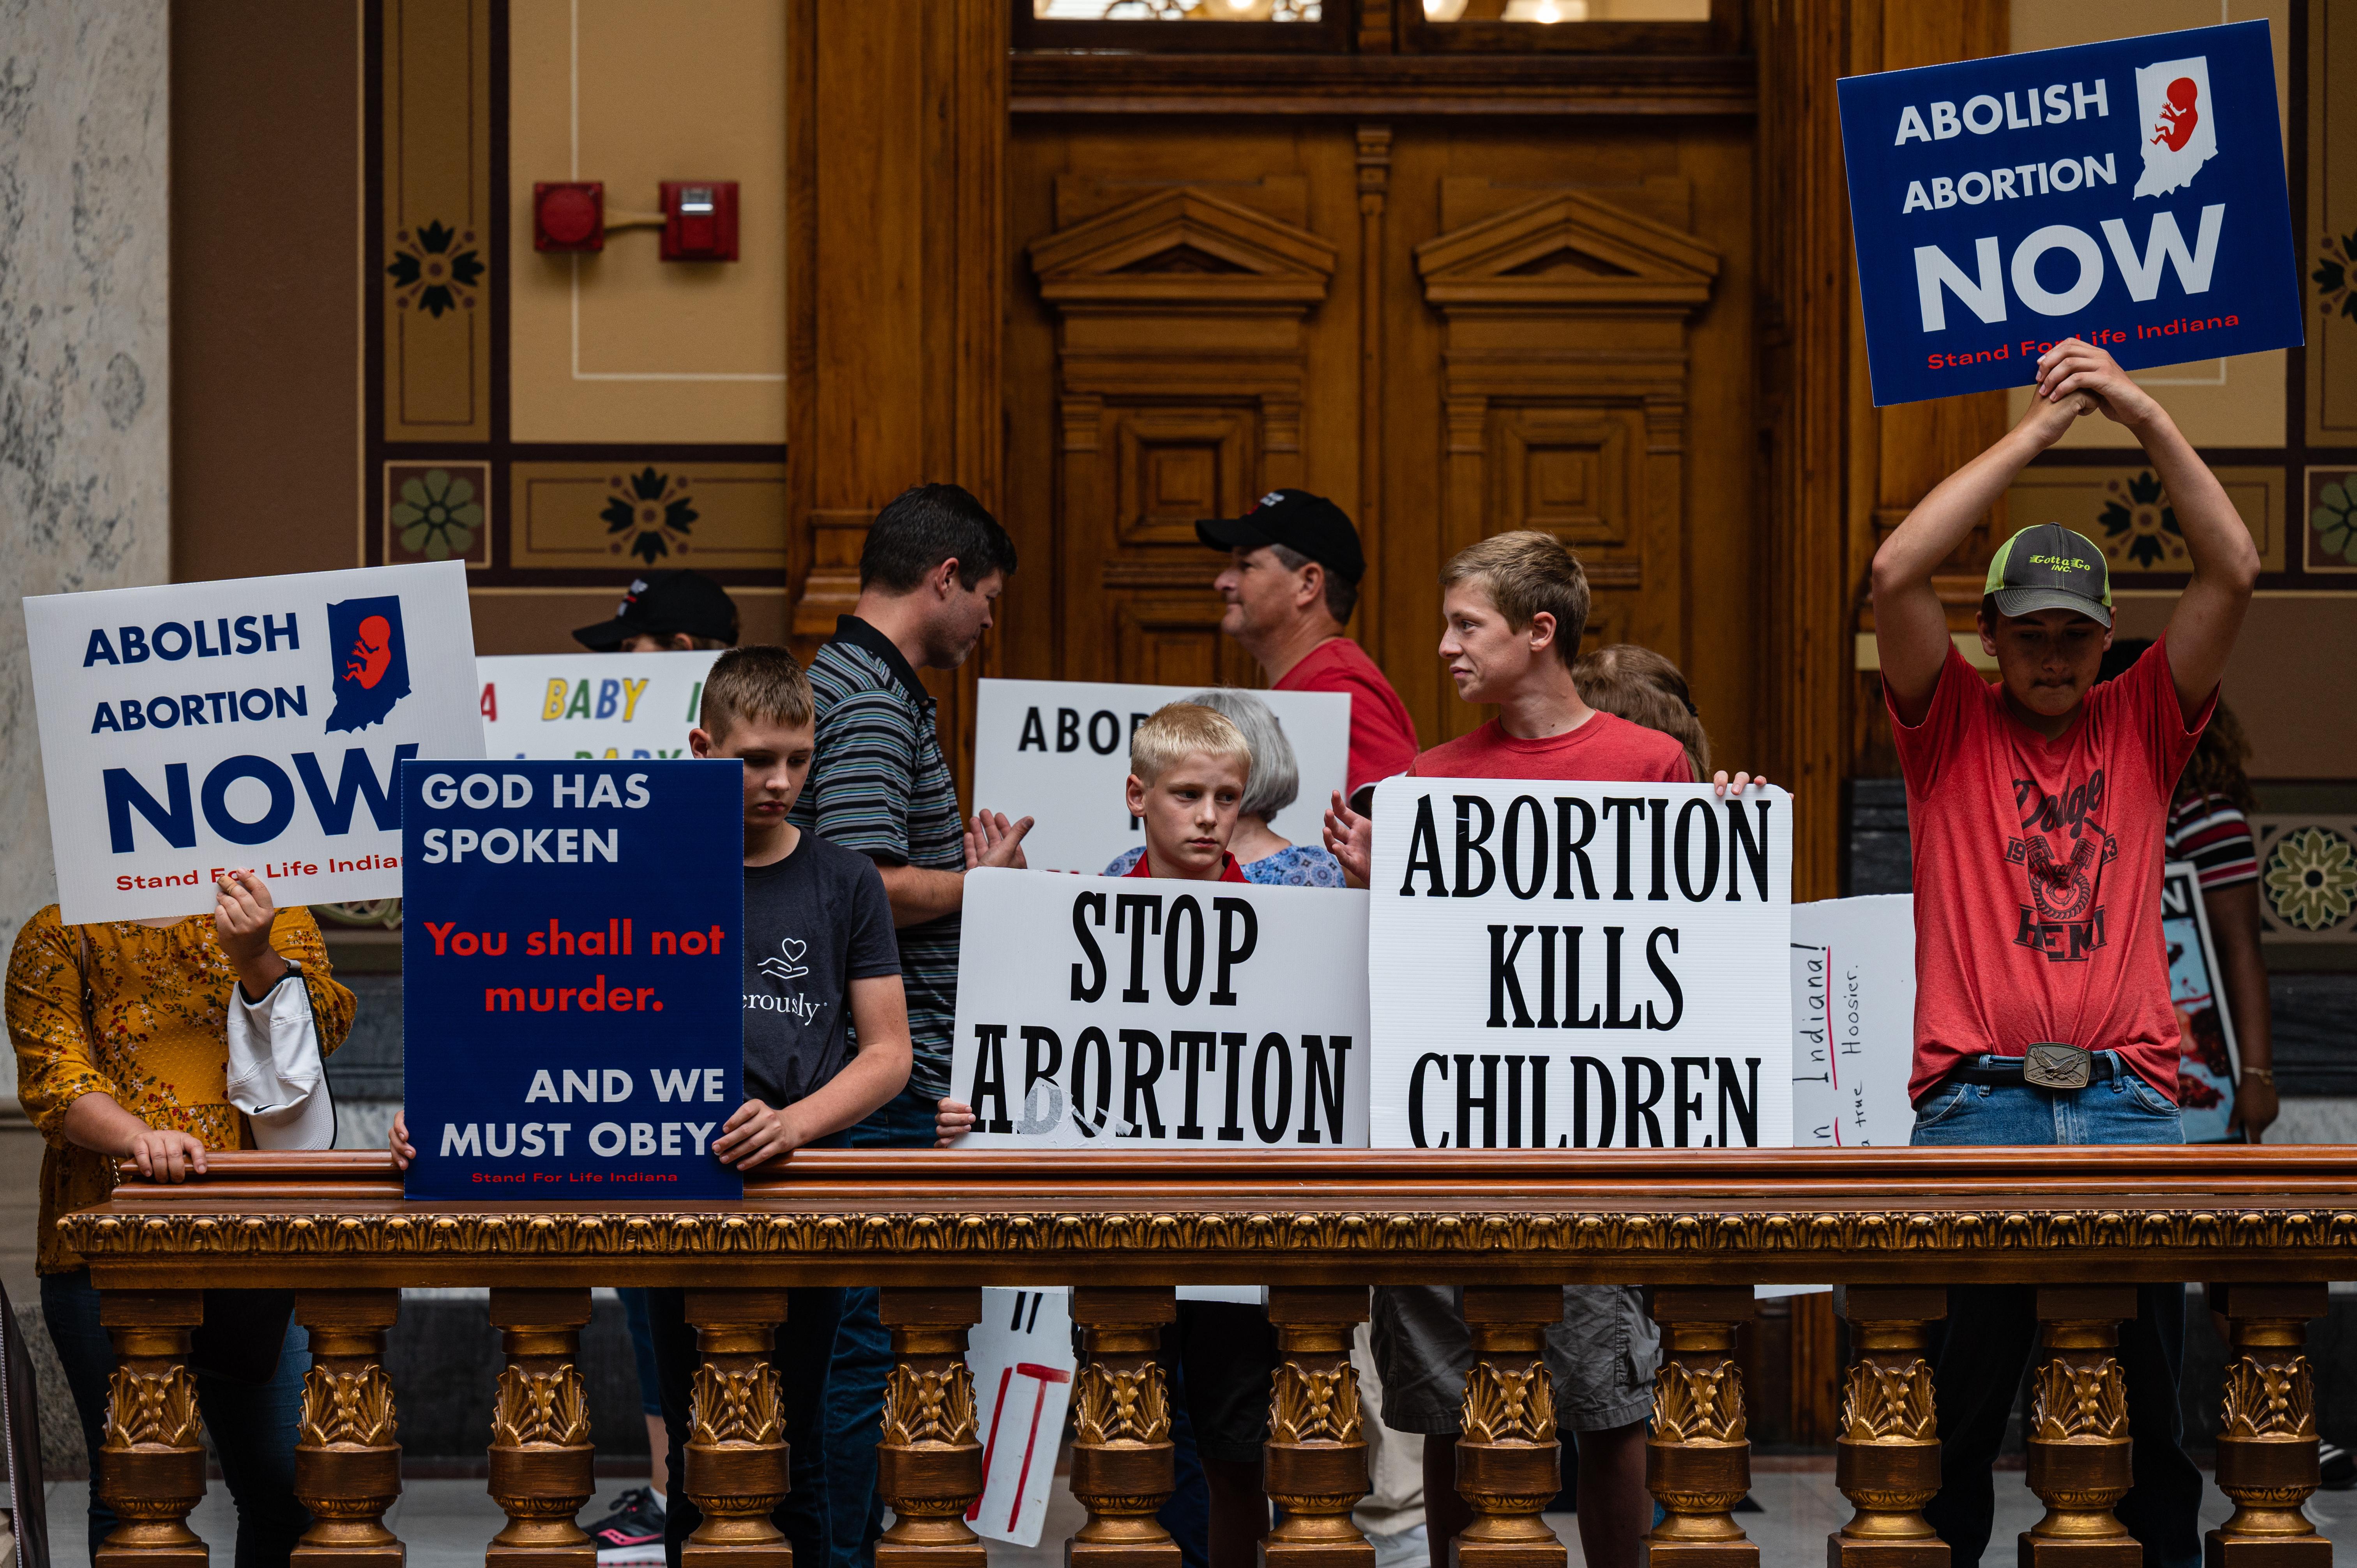 Anti-abortion protesters hold up signs inside of the Indiana State Capitol building on July 25, 2022 in Indianapolis, Indiana. Signs say "STOP ABORTION" and "Abortion Kills Children."